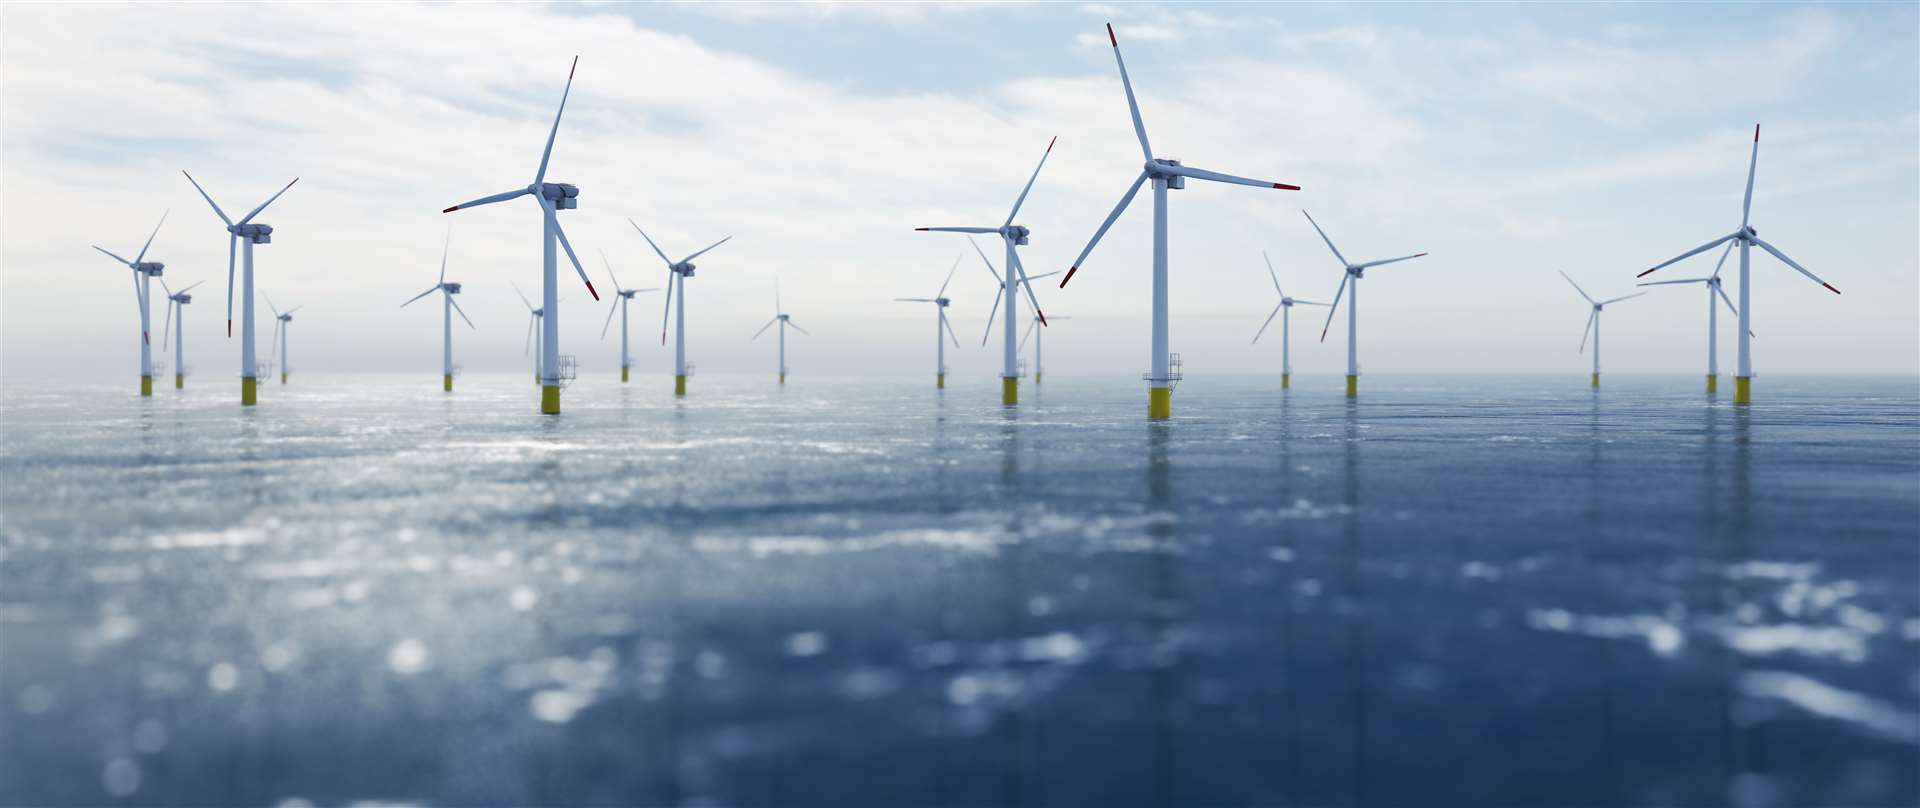 Offshore wind turbines should be built in the UK, not abroad, according to Jamie Stone.